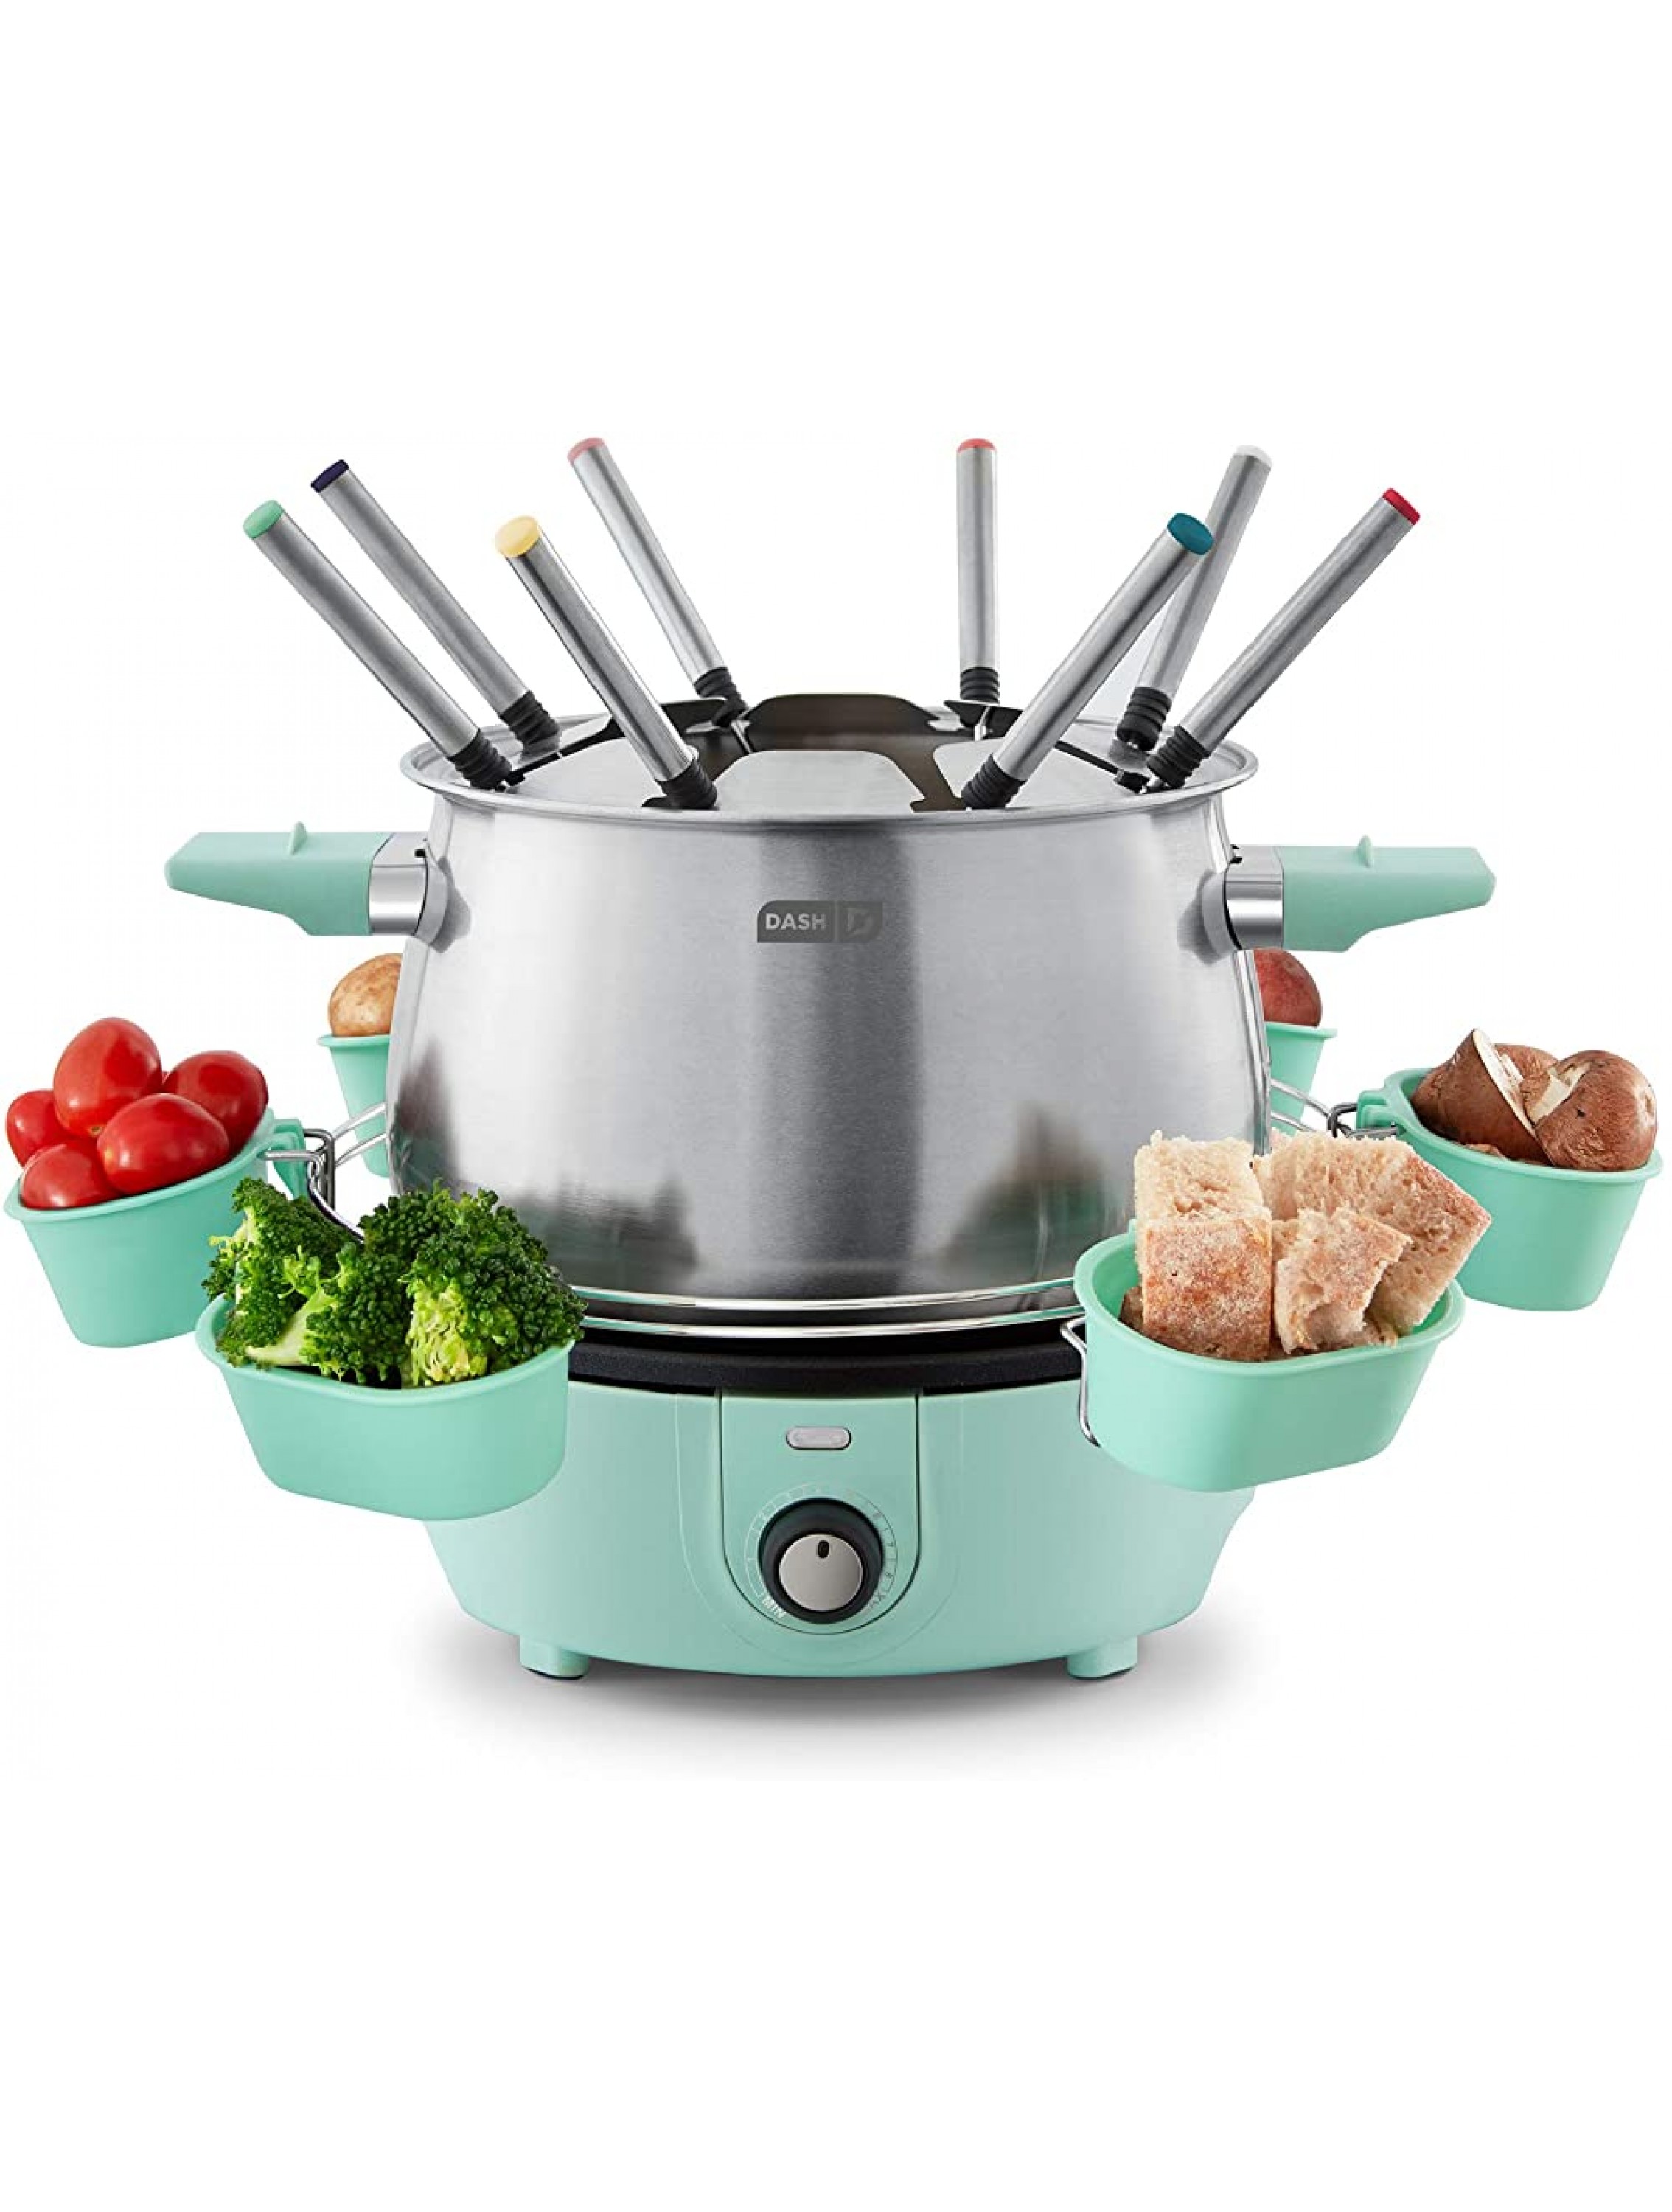 Dash Deluxe Stainless Steel Fondue Maker with Temperature Control Fondue Forks Cups and Rack with Recipe Guide Included 3-Quart Non-Stick – Aqua - B57CWRDX1